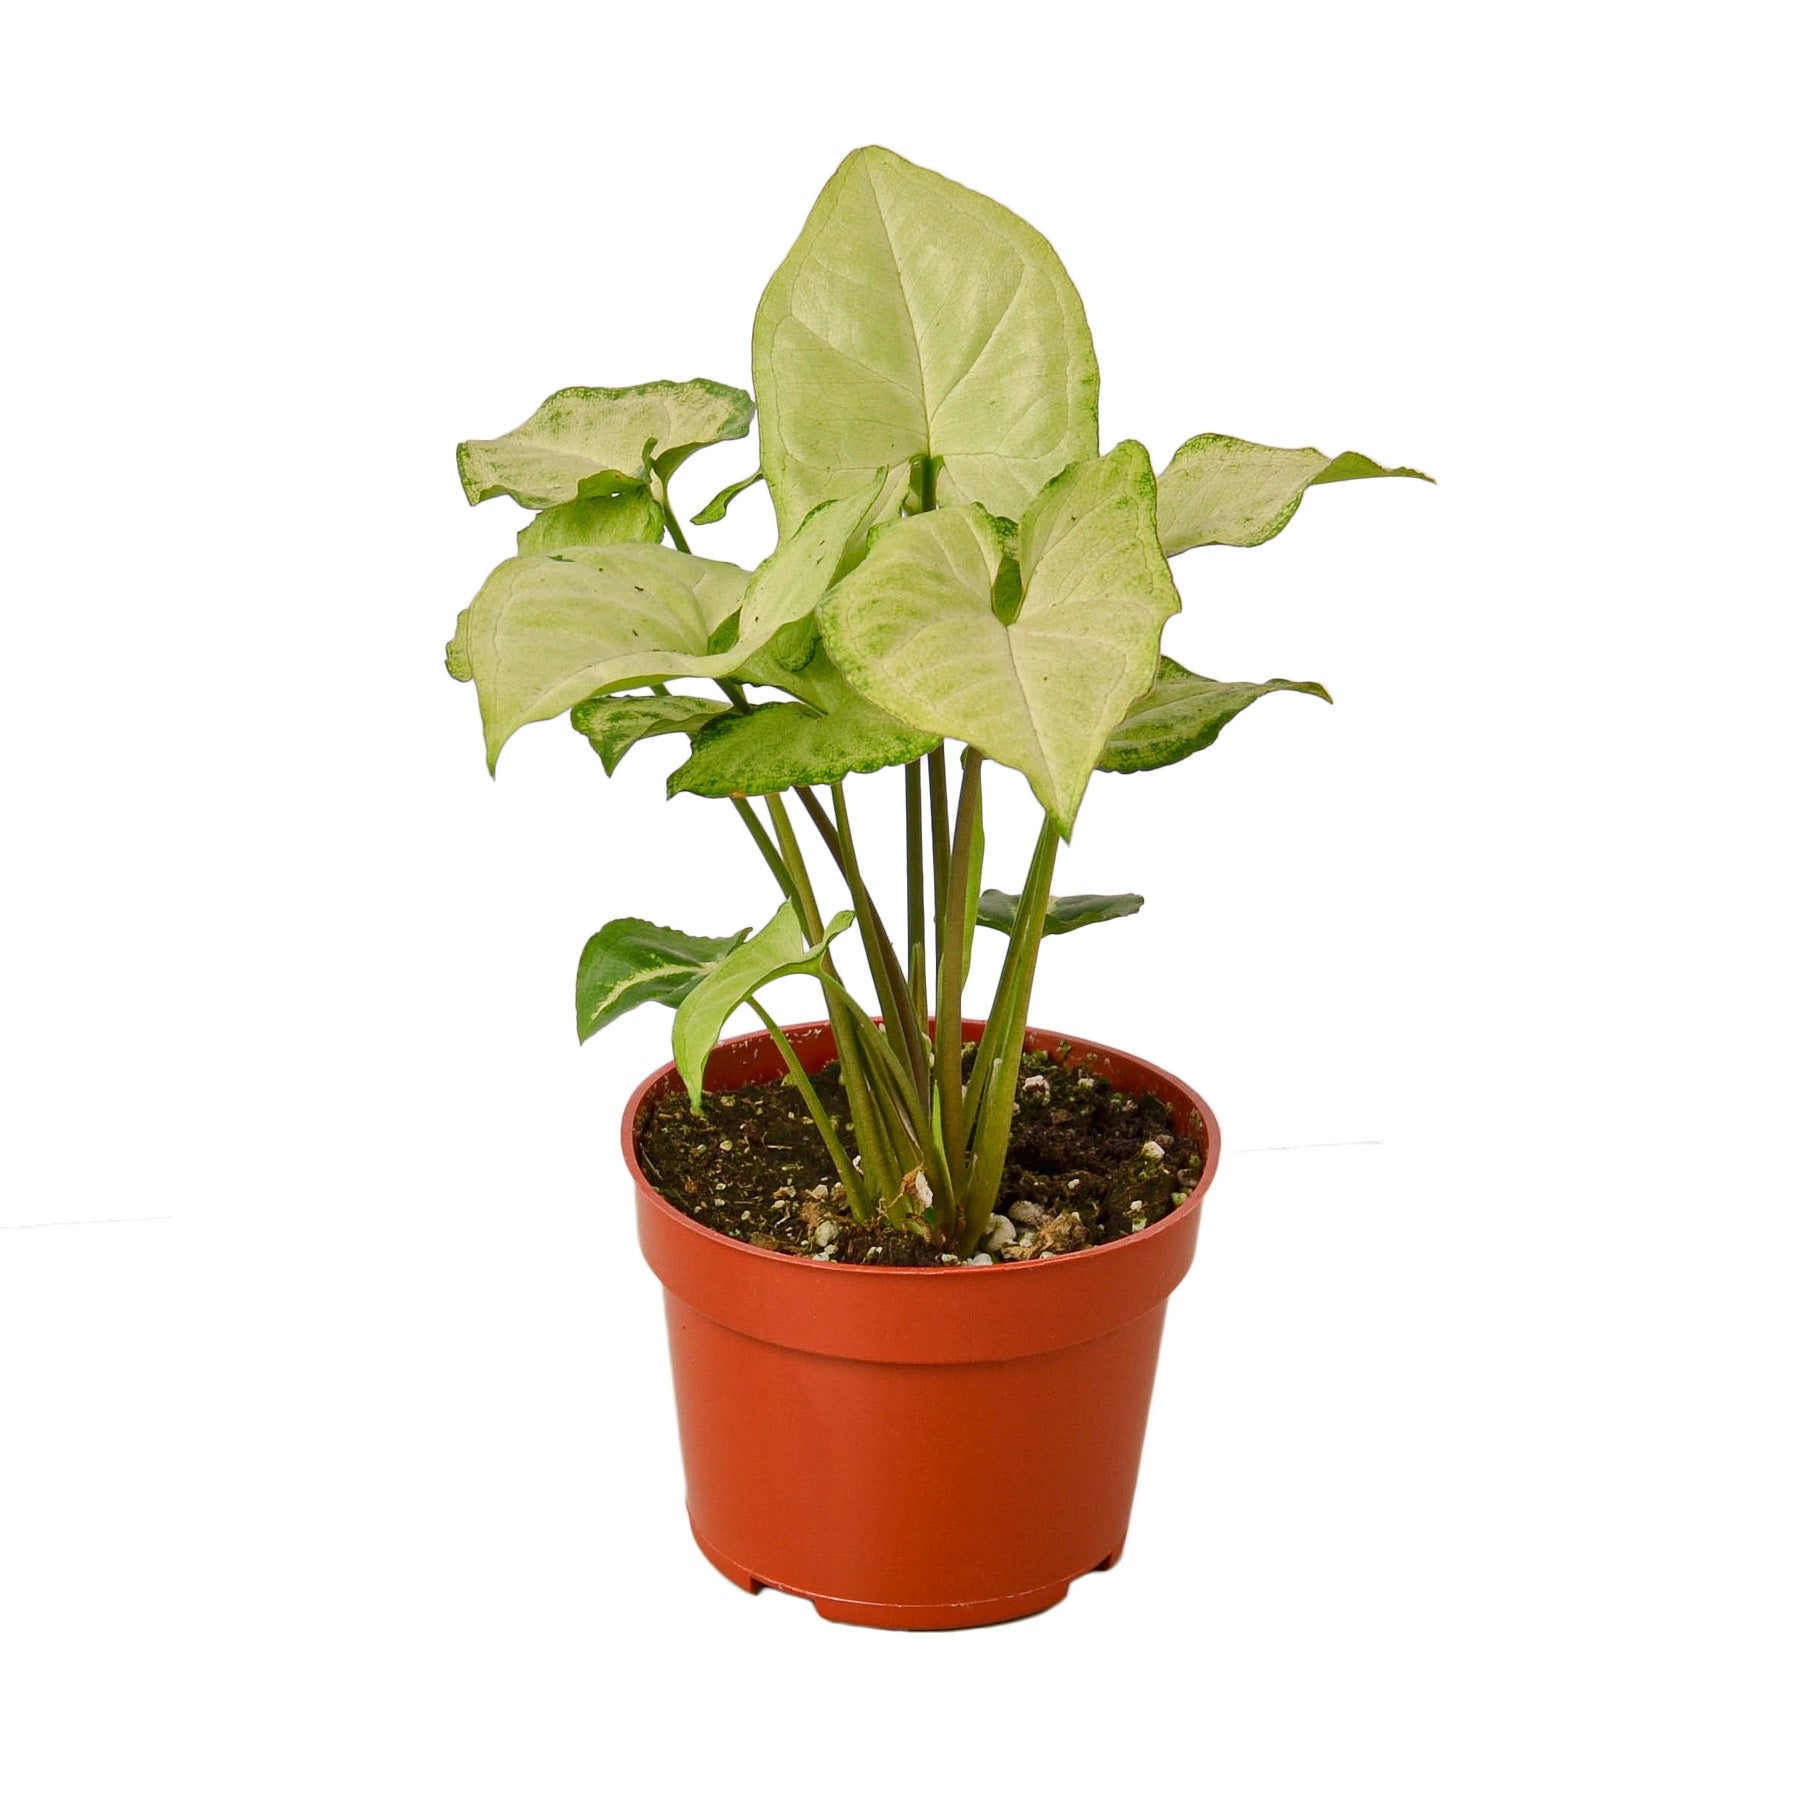 A plant on a white background.